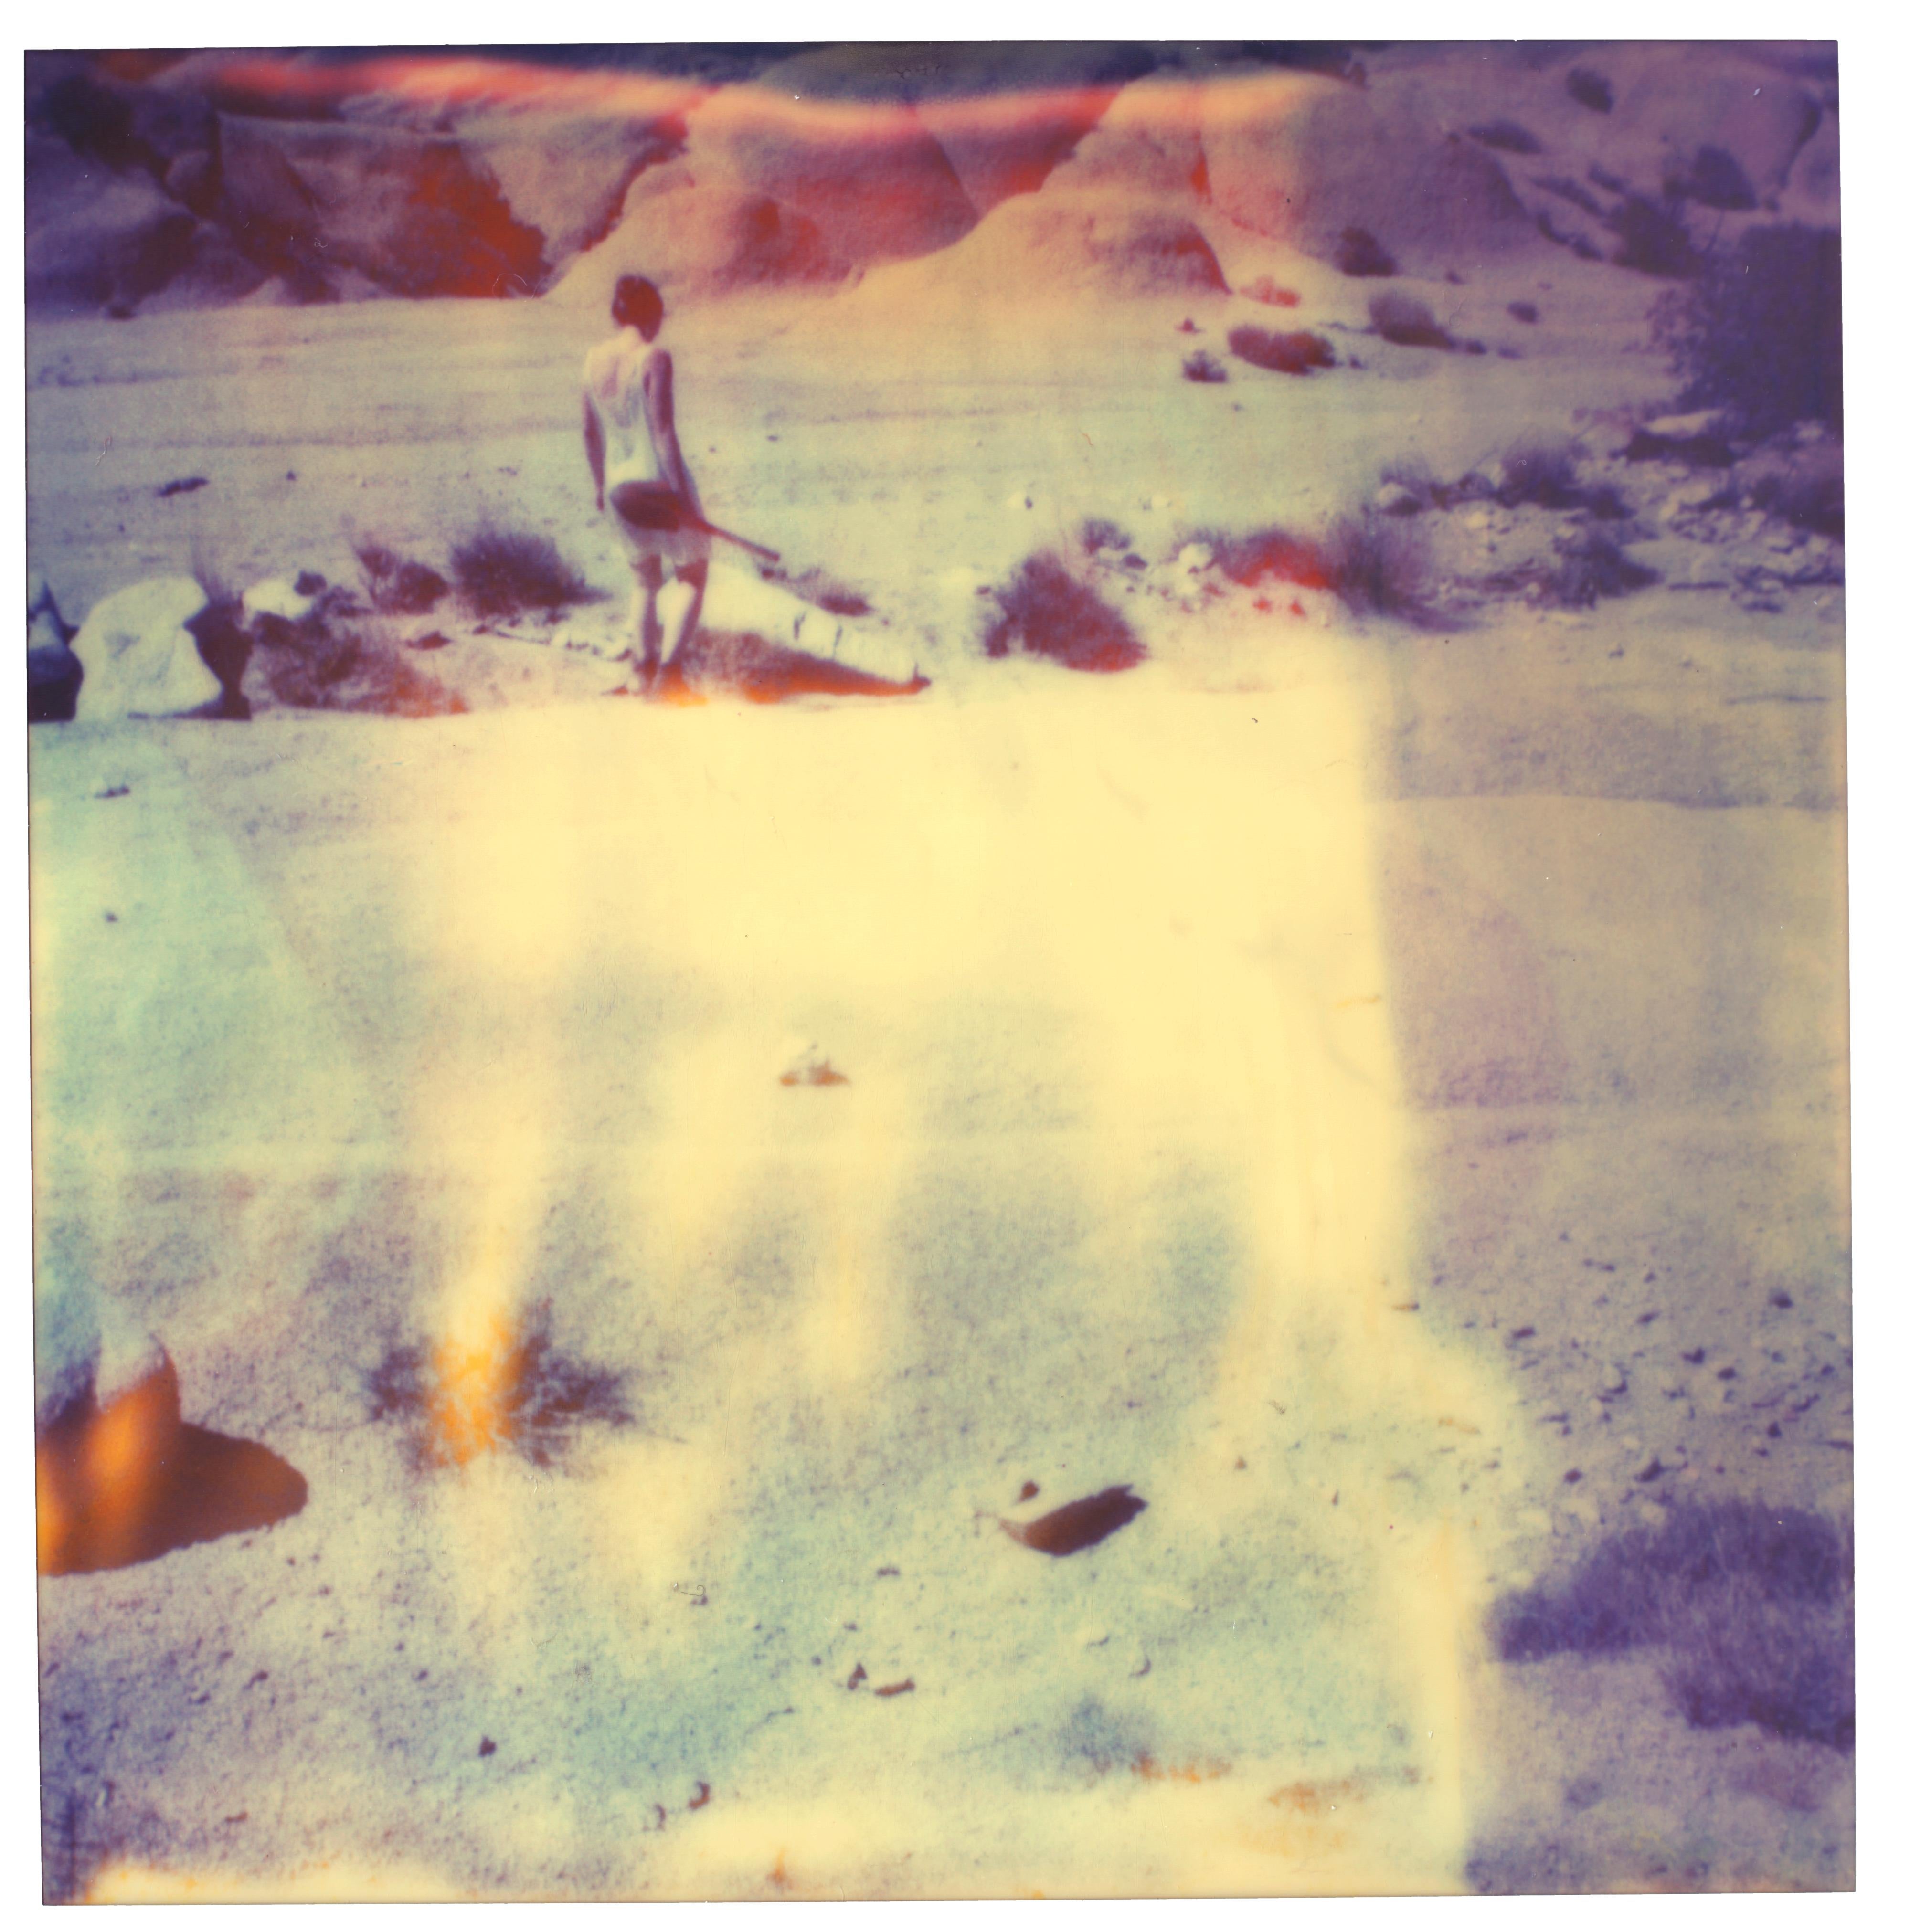 Buried - 8 pieces - Contemporary, Figurative, expired, Polaroid, analog For Sale 2